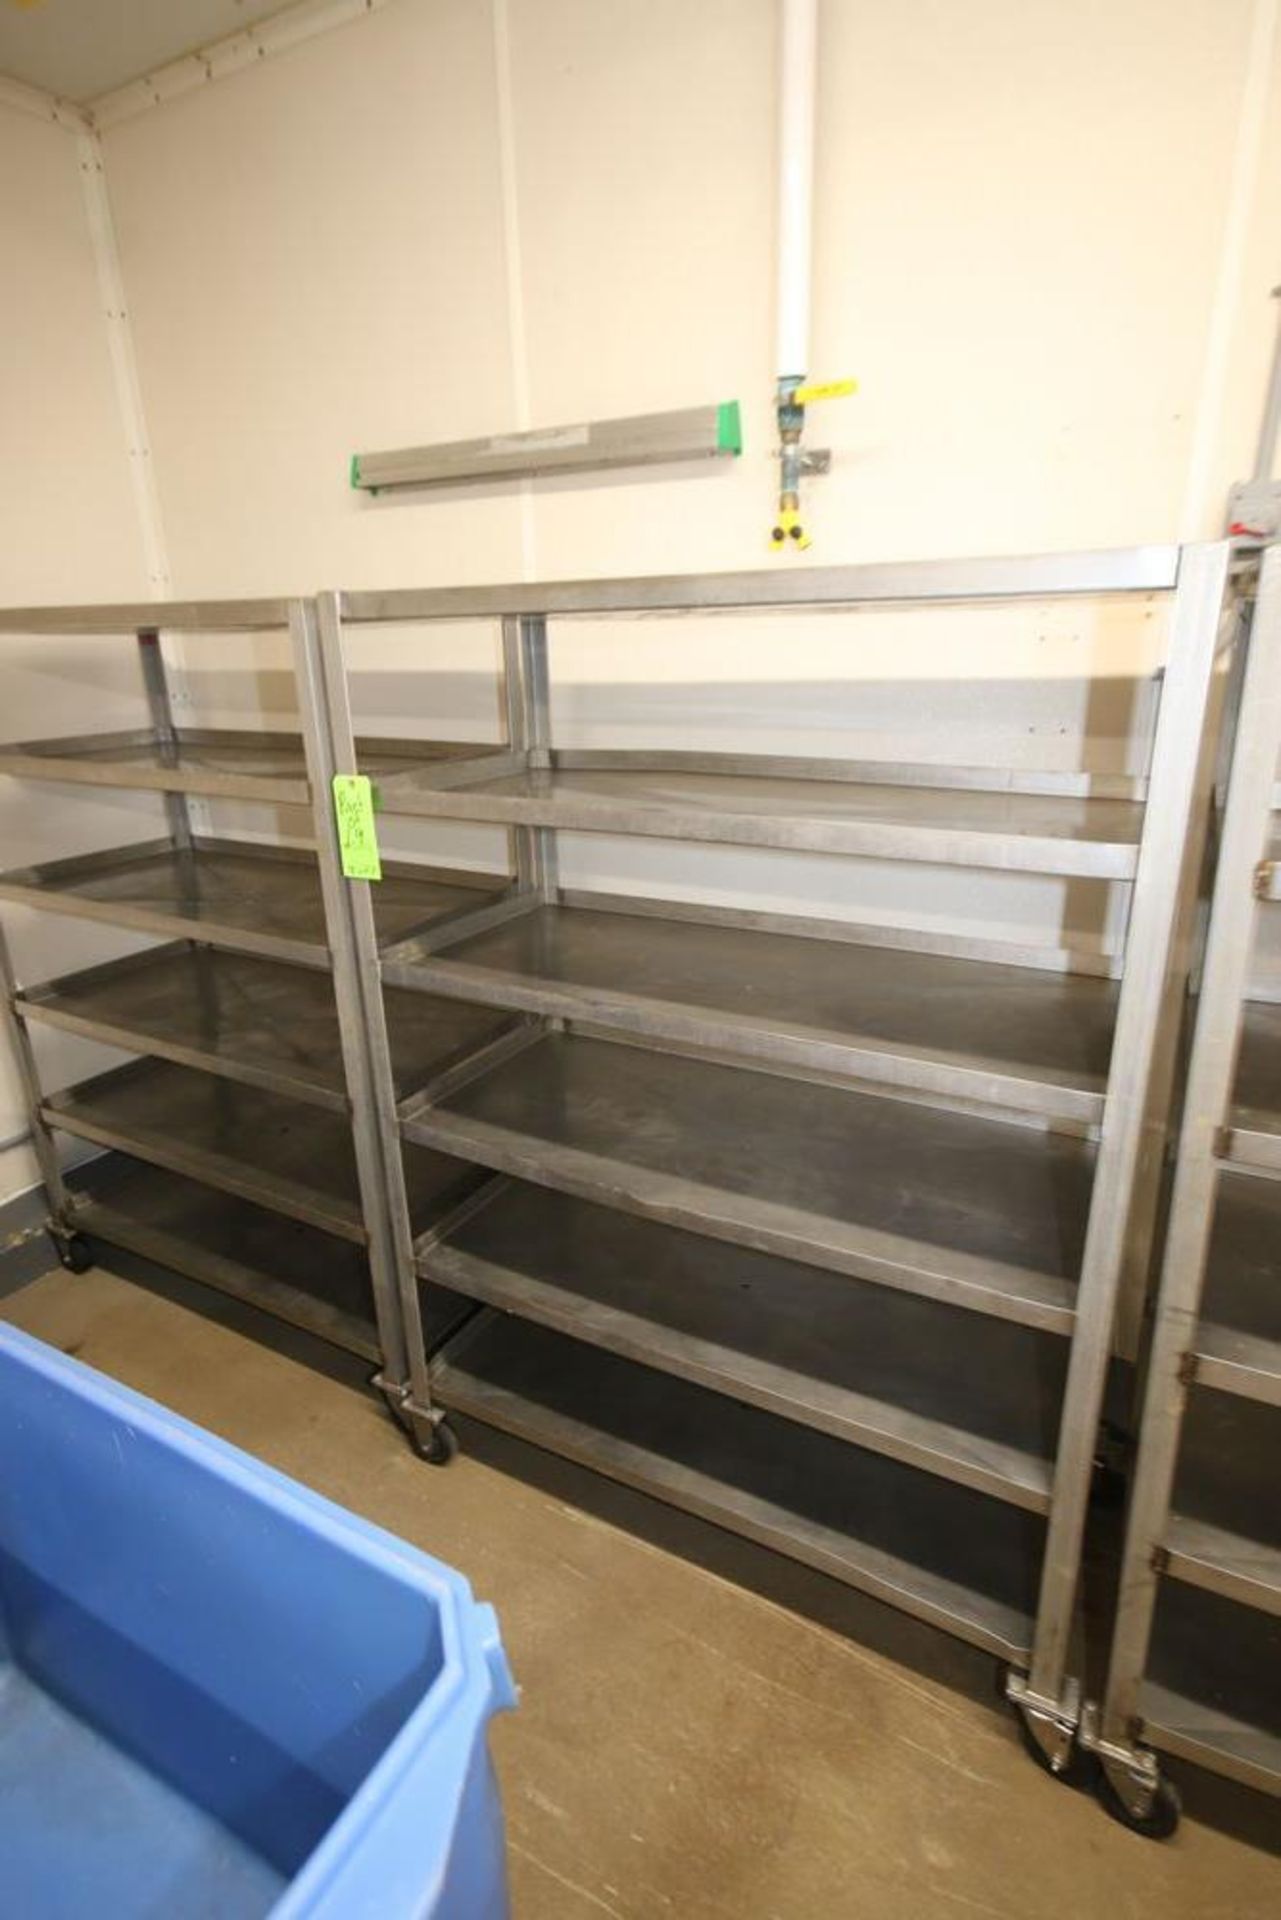 S/S Portable Shelving Units, with (4) S/S Shelves, Mounted on Casters, Overall Dims.: Aprox. 45-1/2" - Image 3 of 4